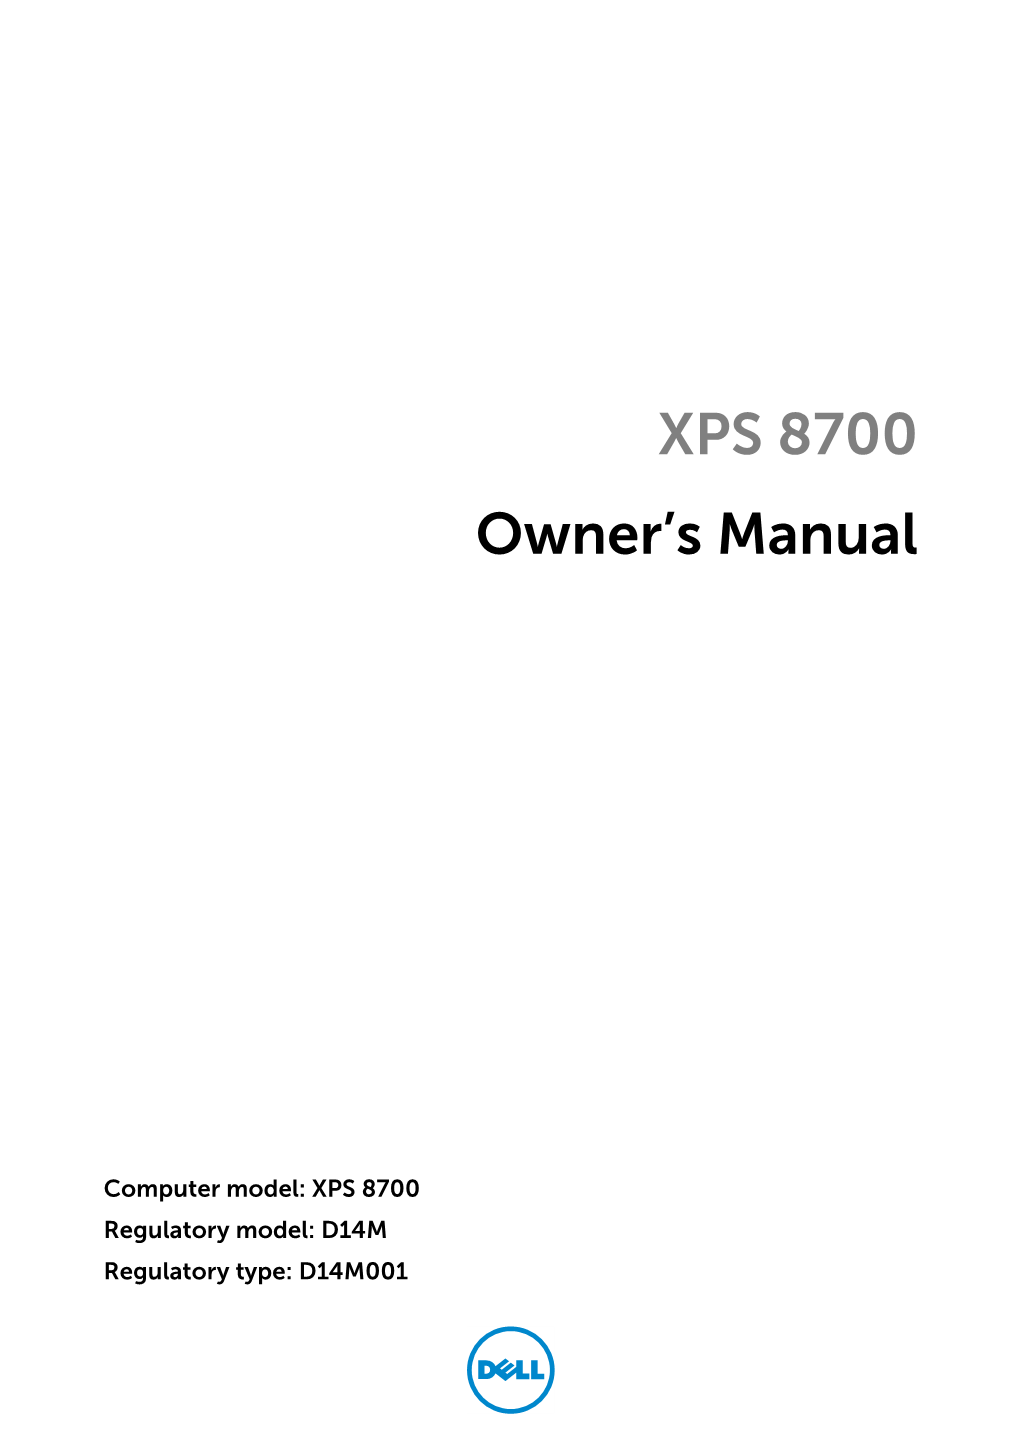 Xps 8700 Owner's Manual